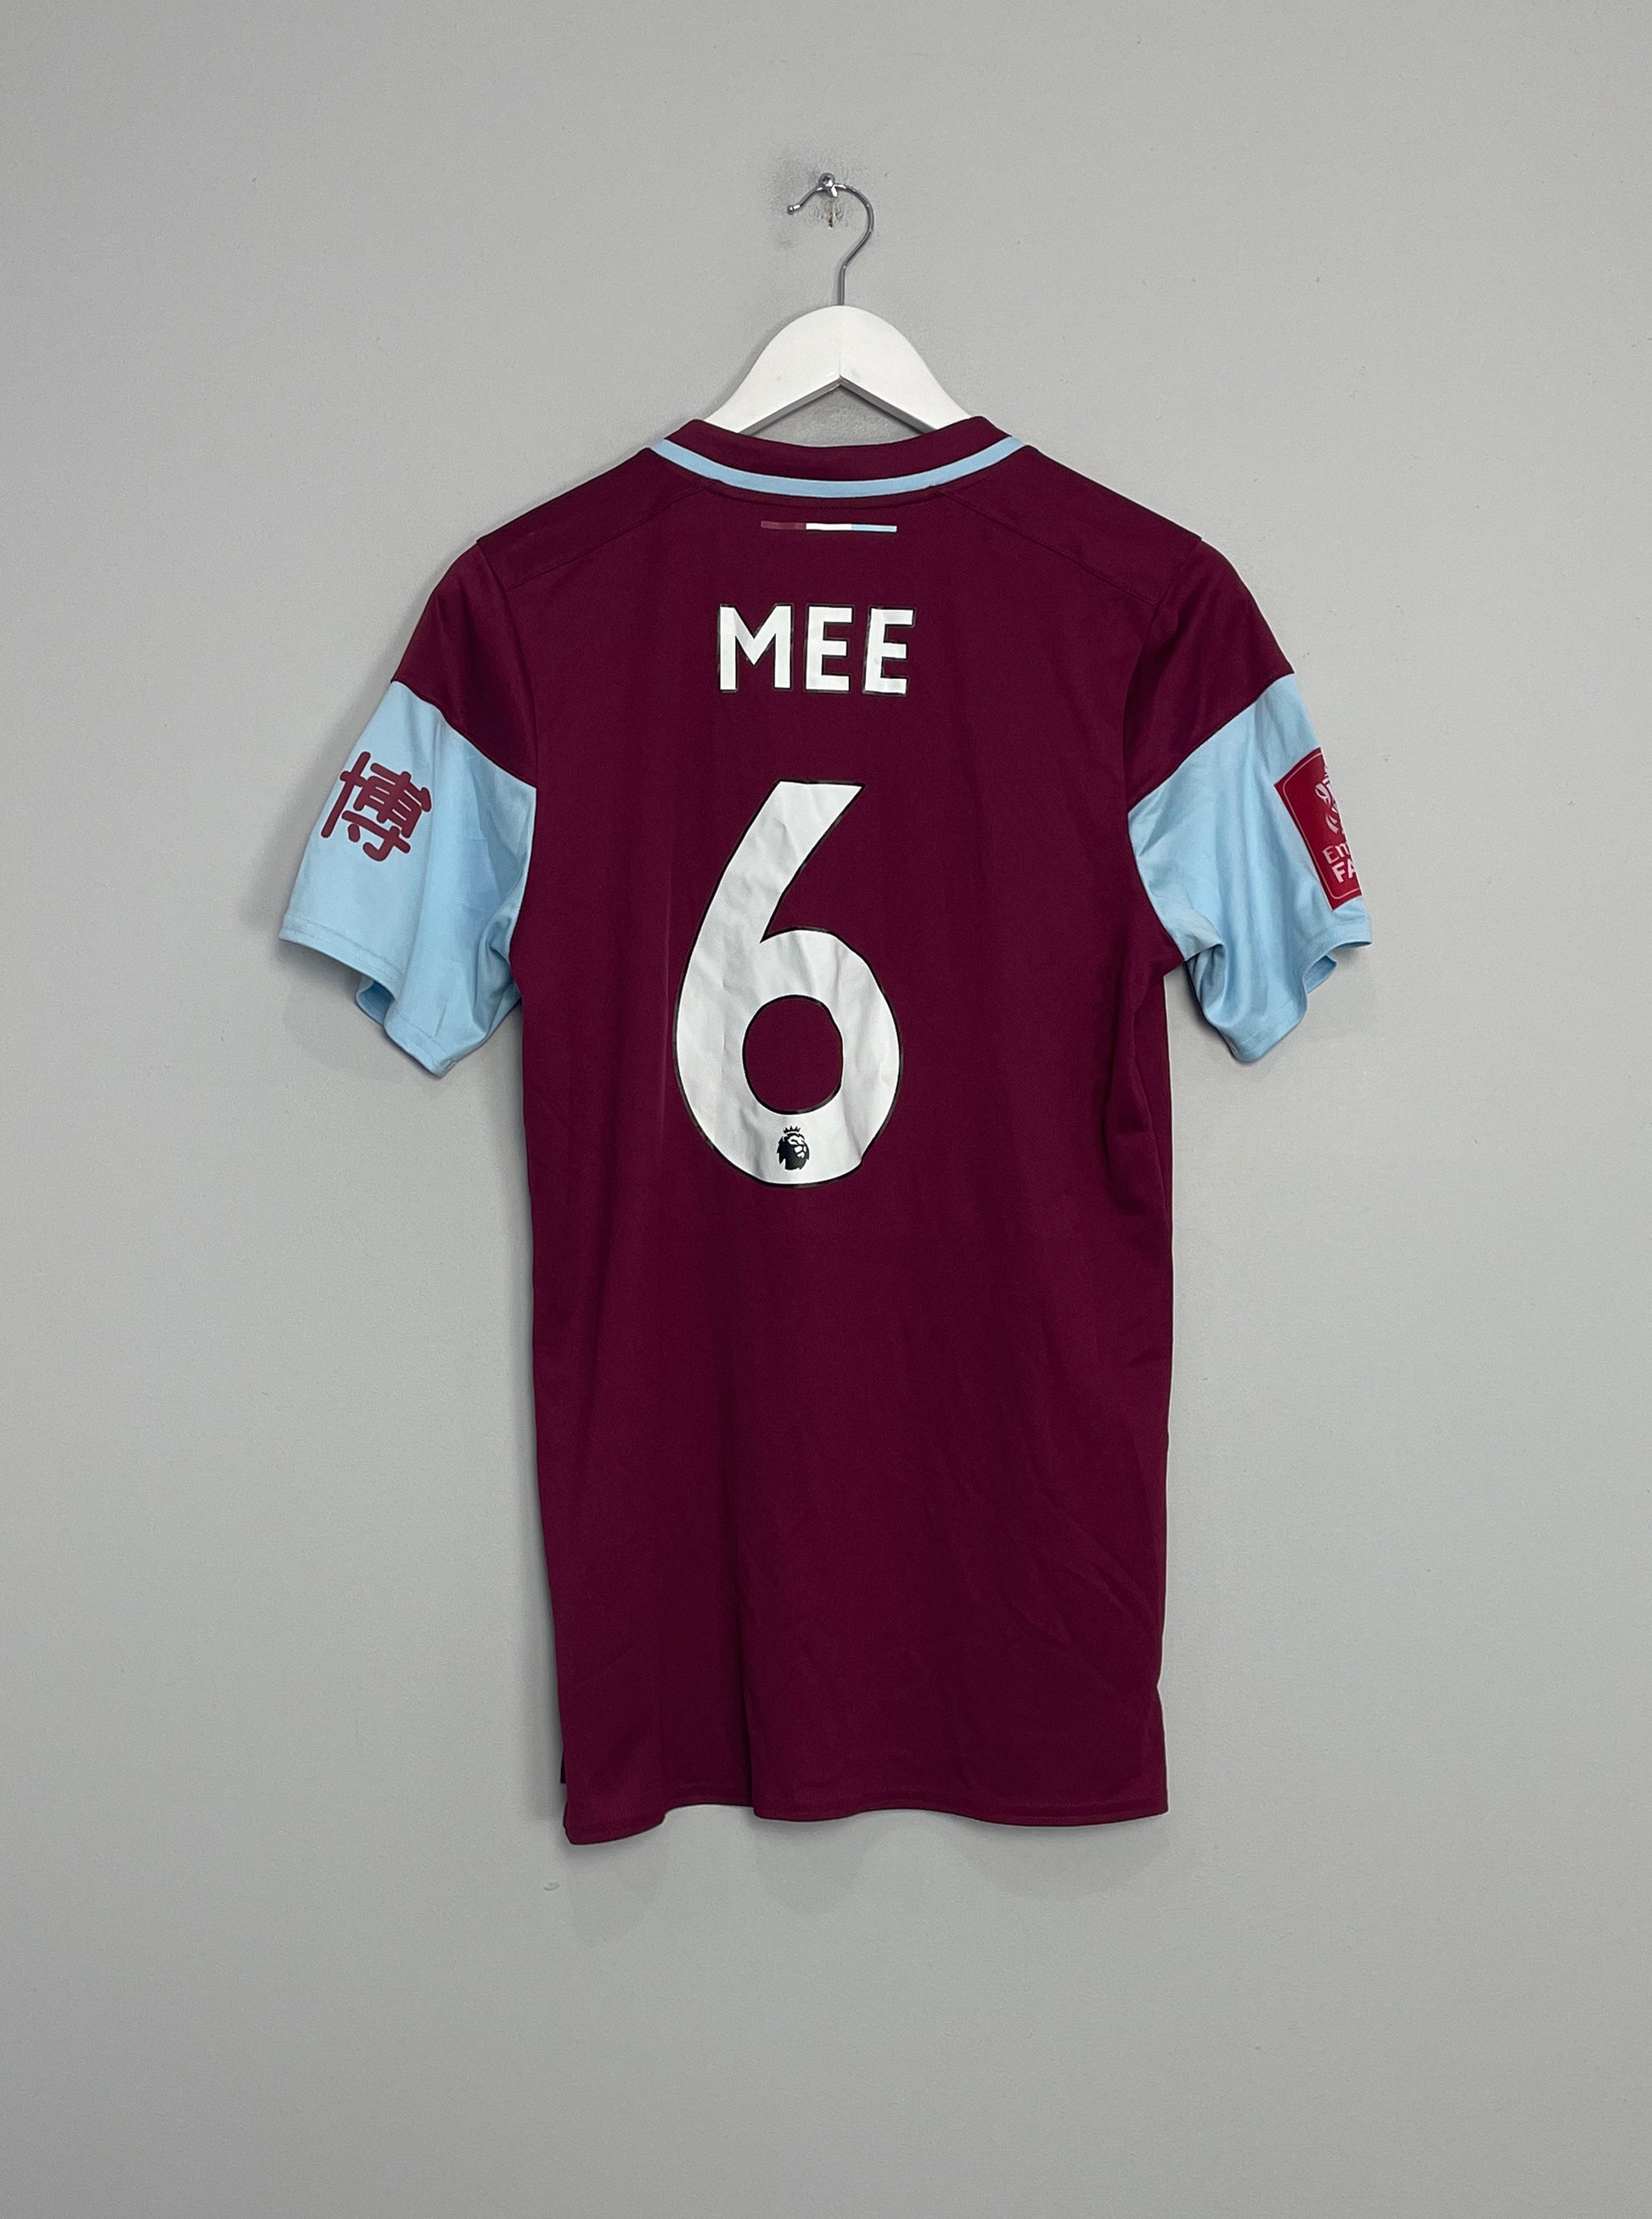 Image of the Burnley Mee shirt from the 2020/21 season